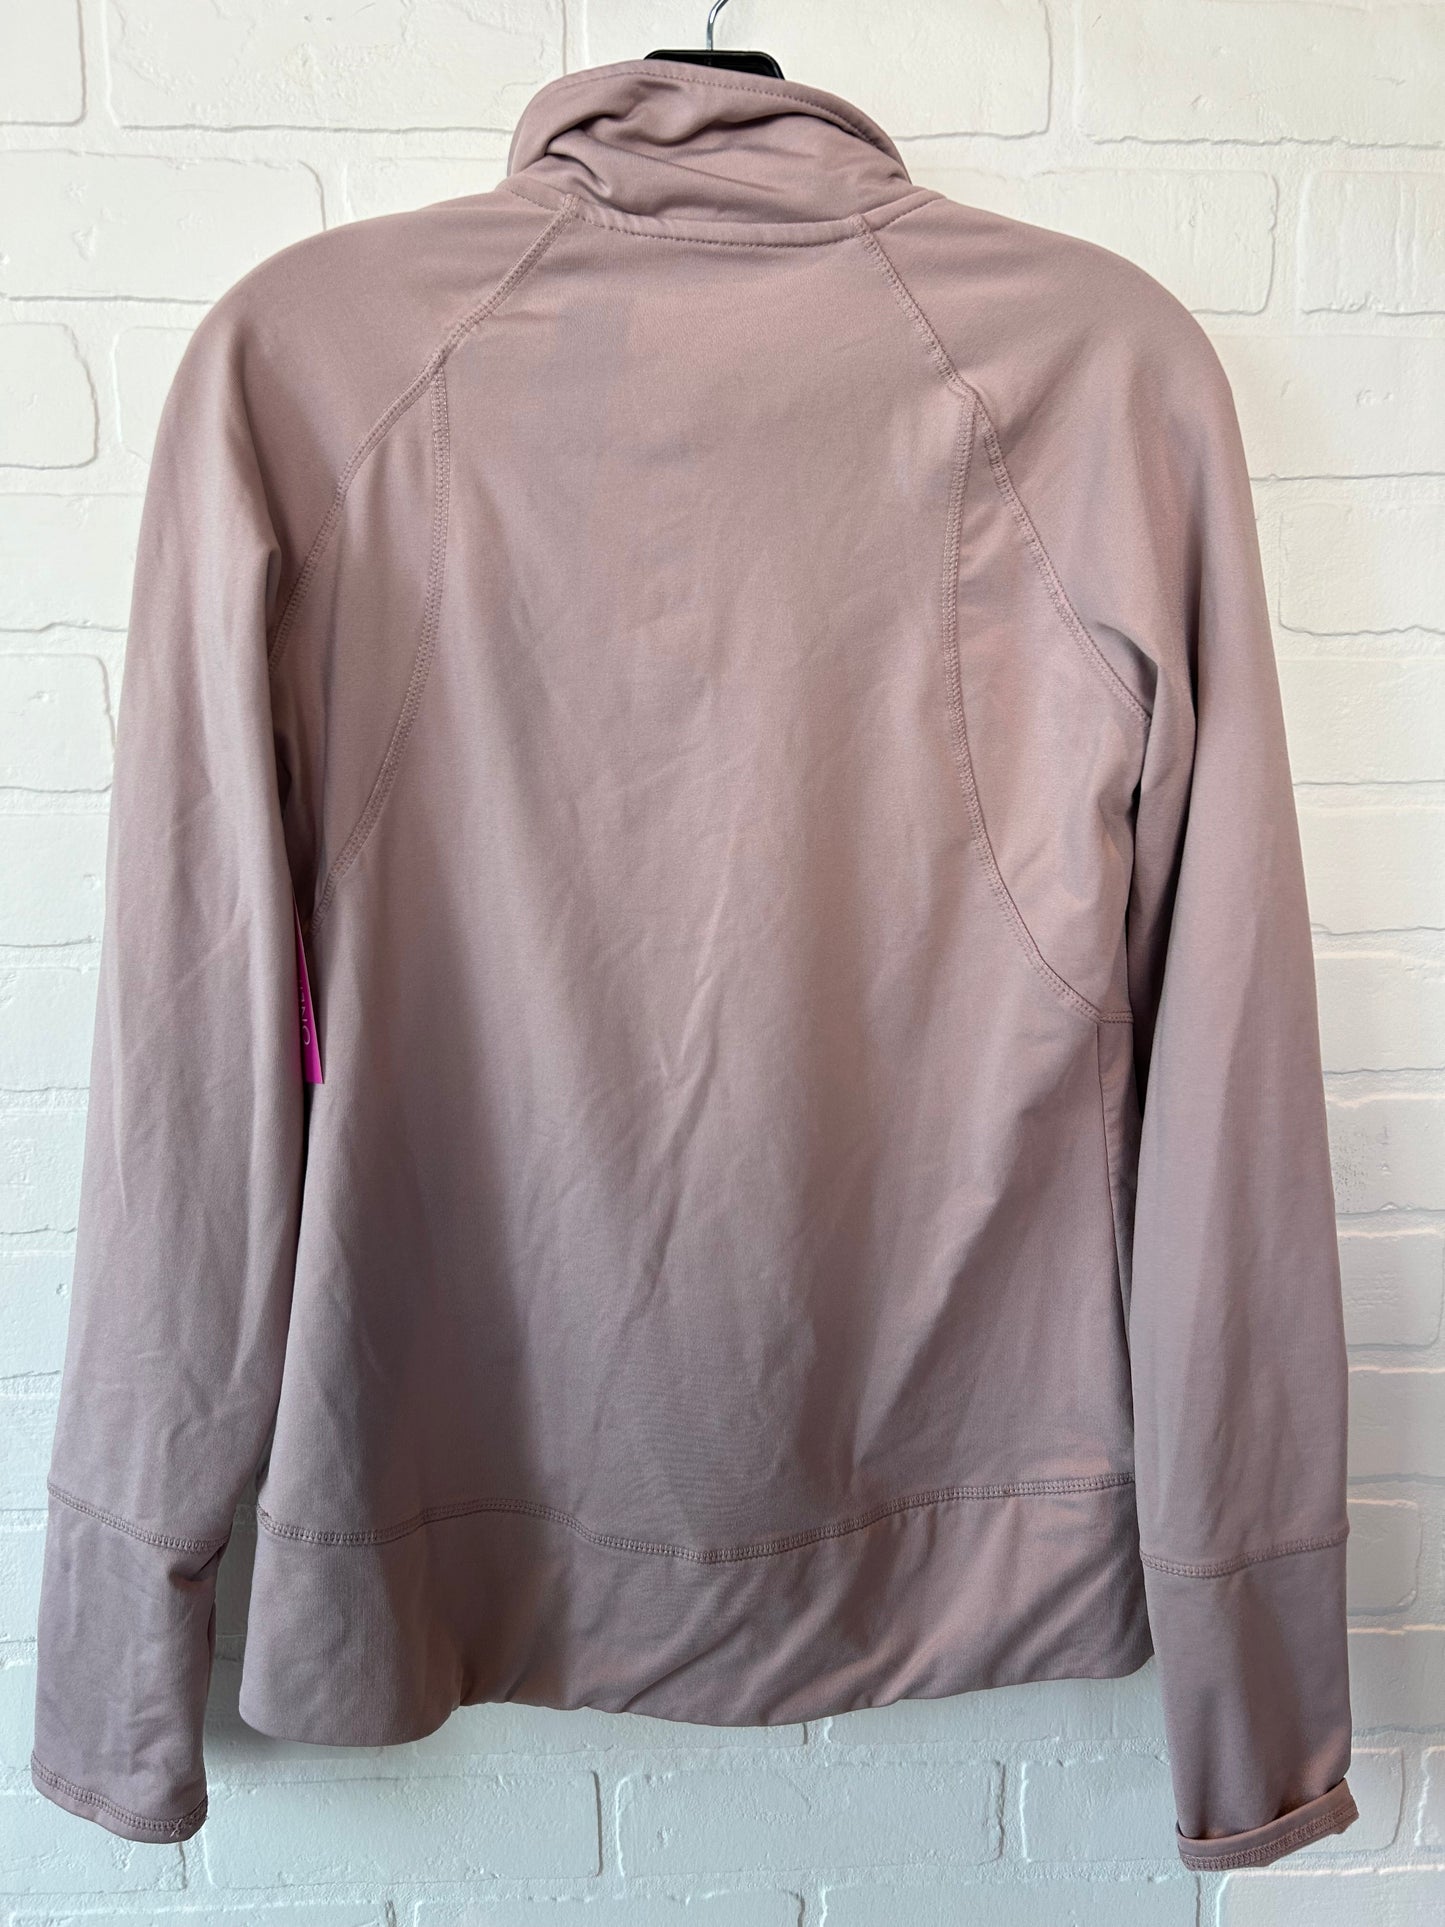 Pink Athletic Top Long Sleeve Collar Mondetta, Size M